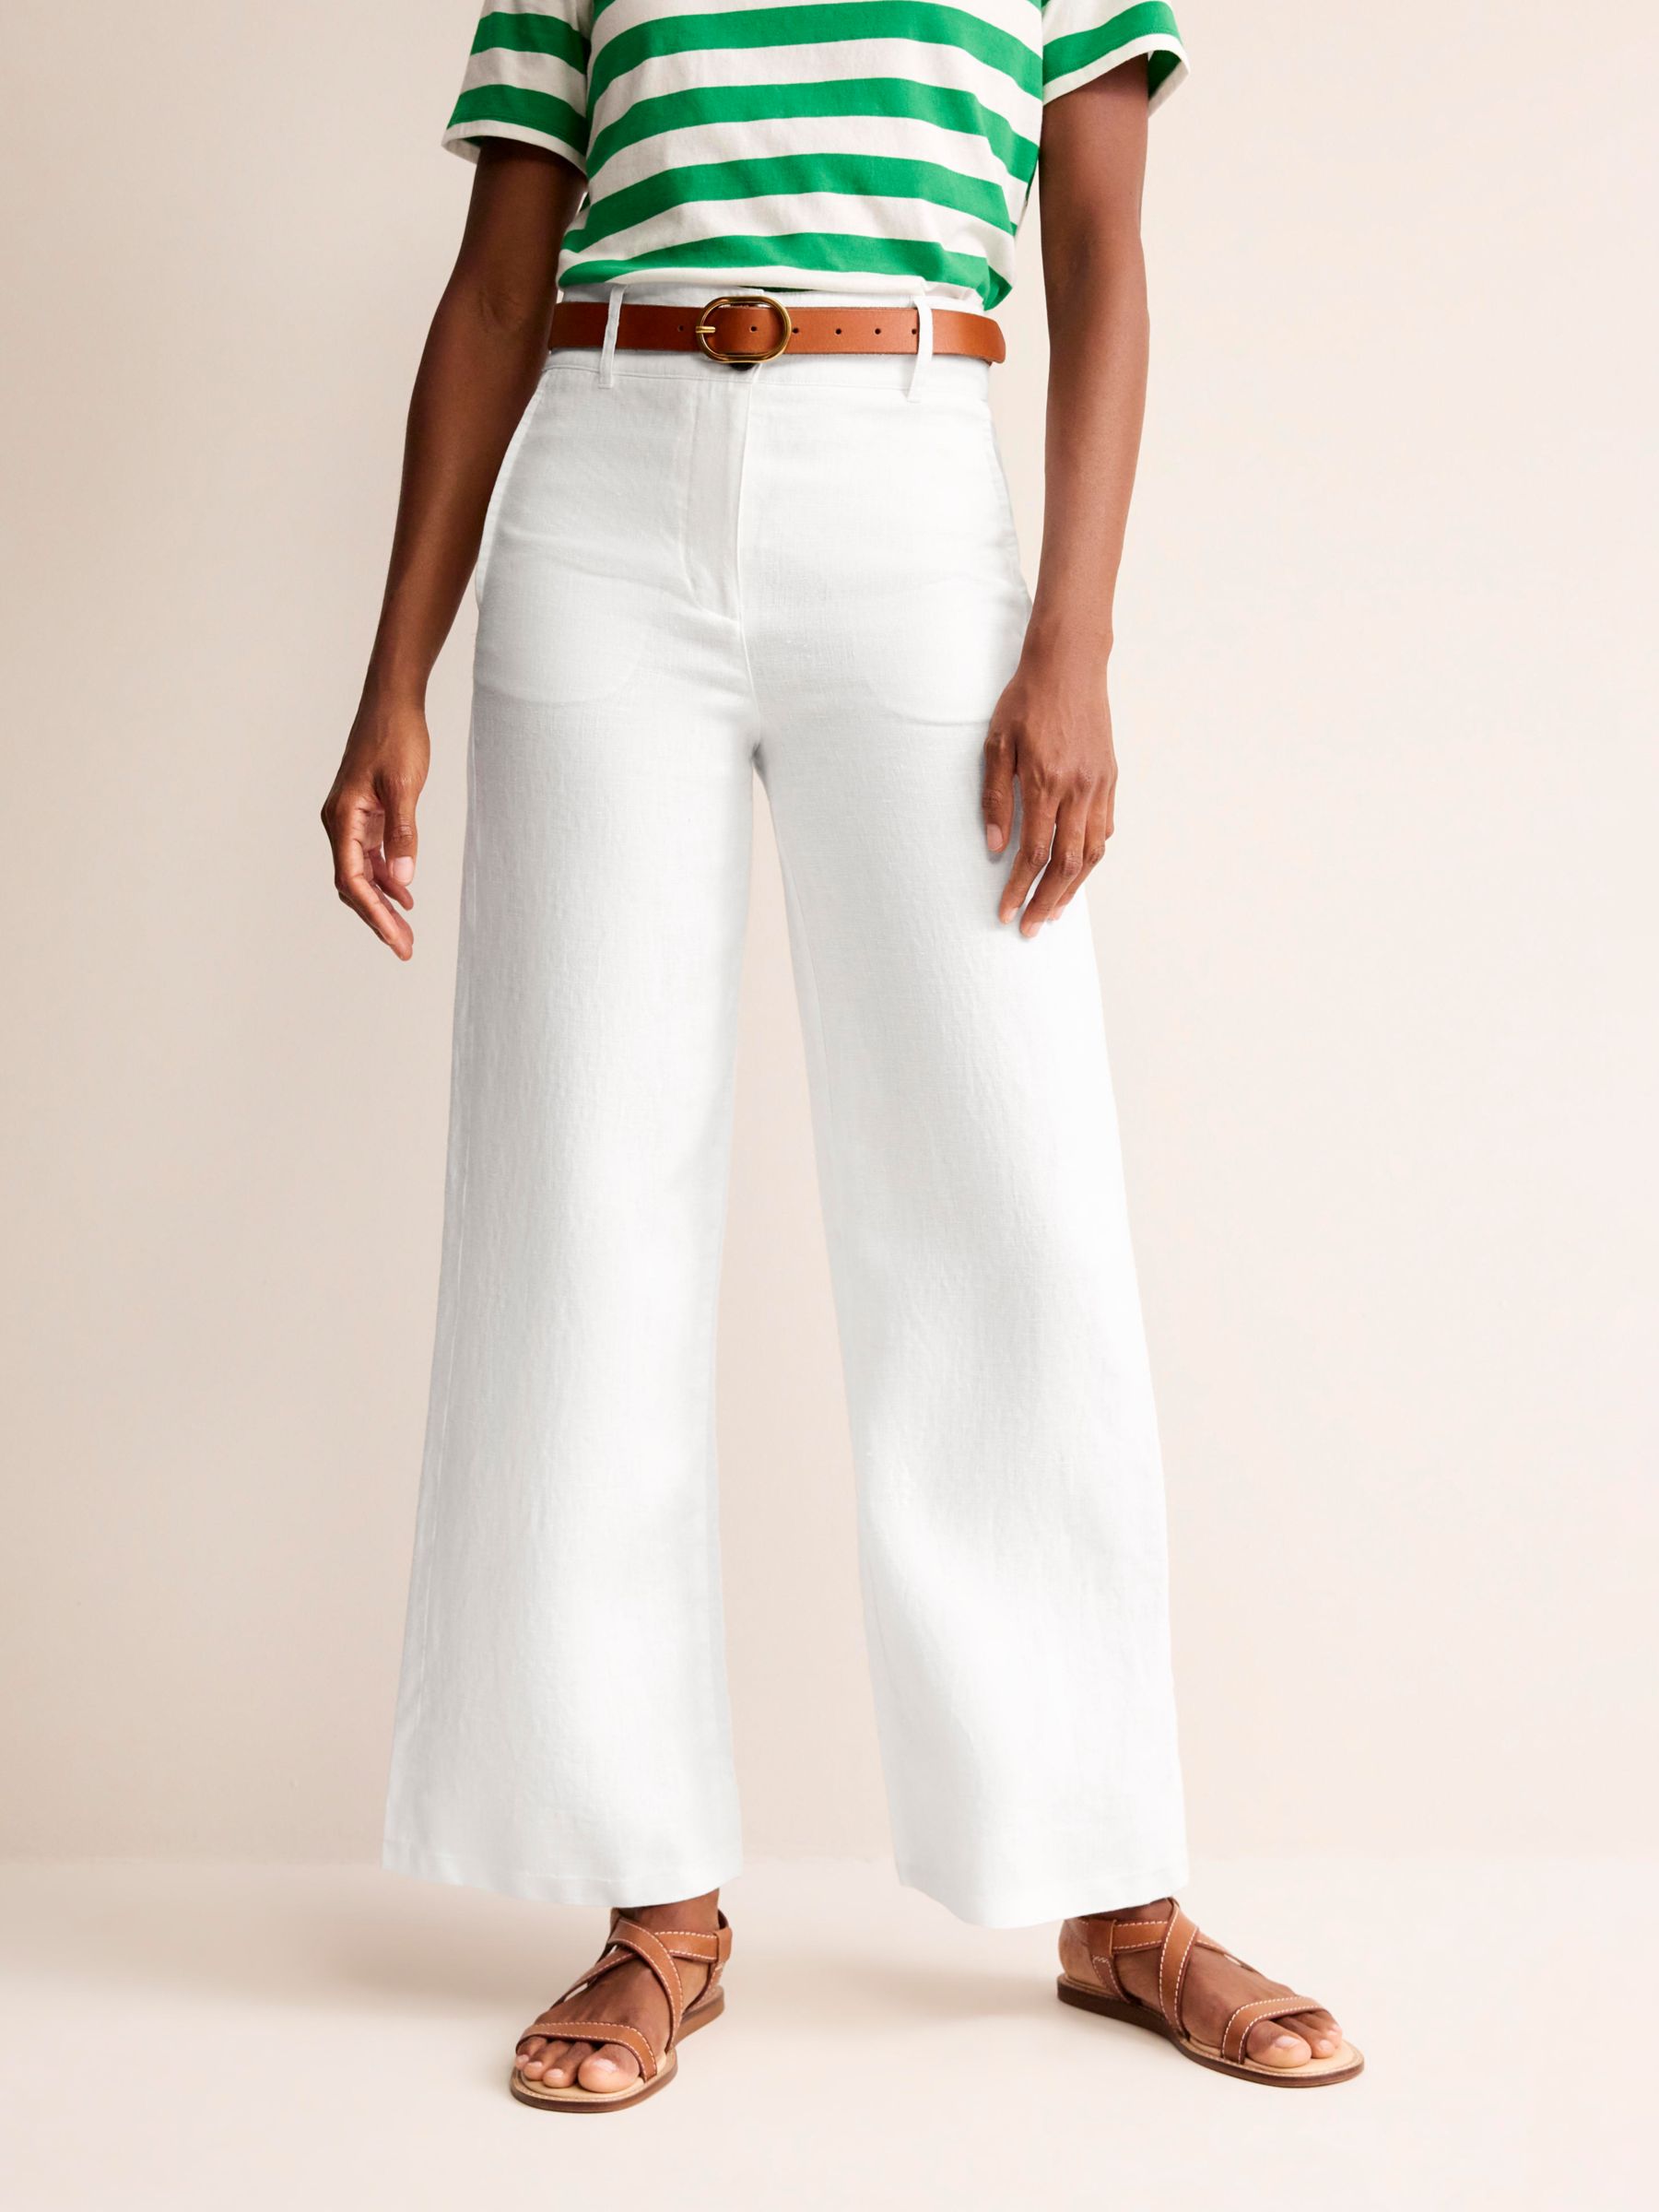 Boden Westbourne Wide Leg Linen Trousers, White, 12